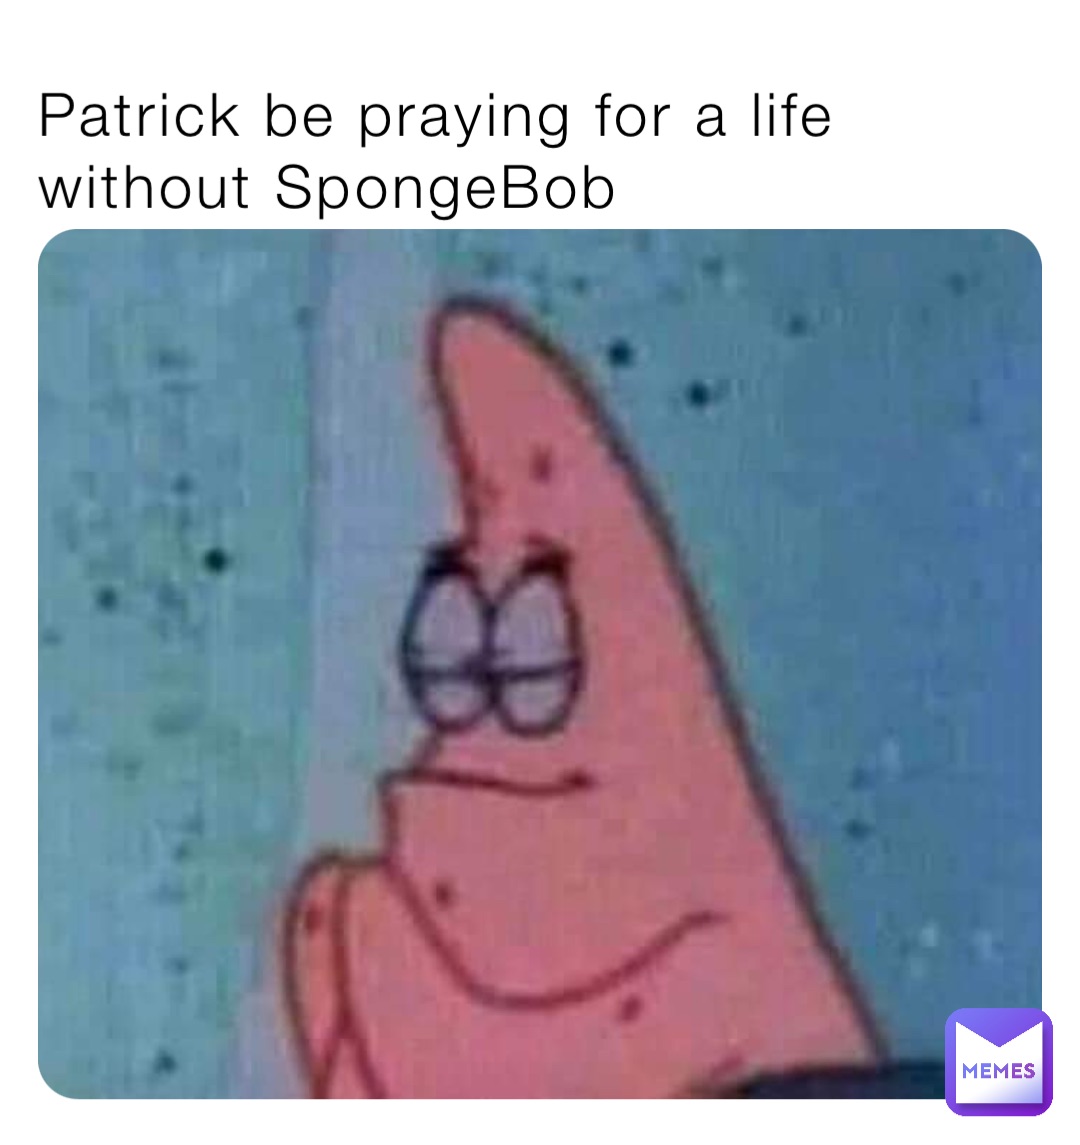 Patrick be praying for a life without SpongeBob